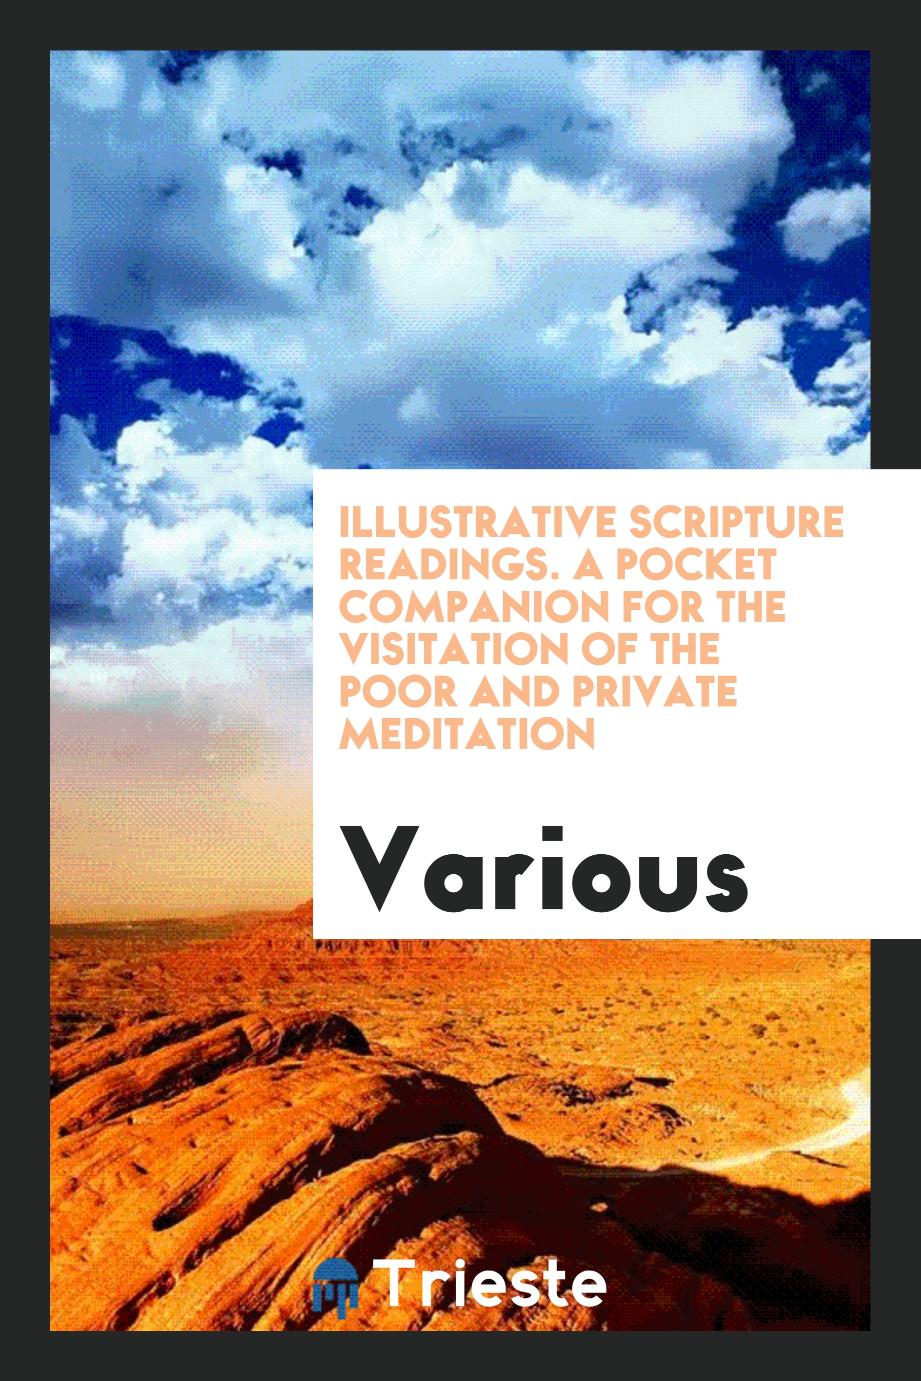 Illustrative scripture readings. A pocket companion for the visitation of the poor and private meditation